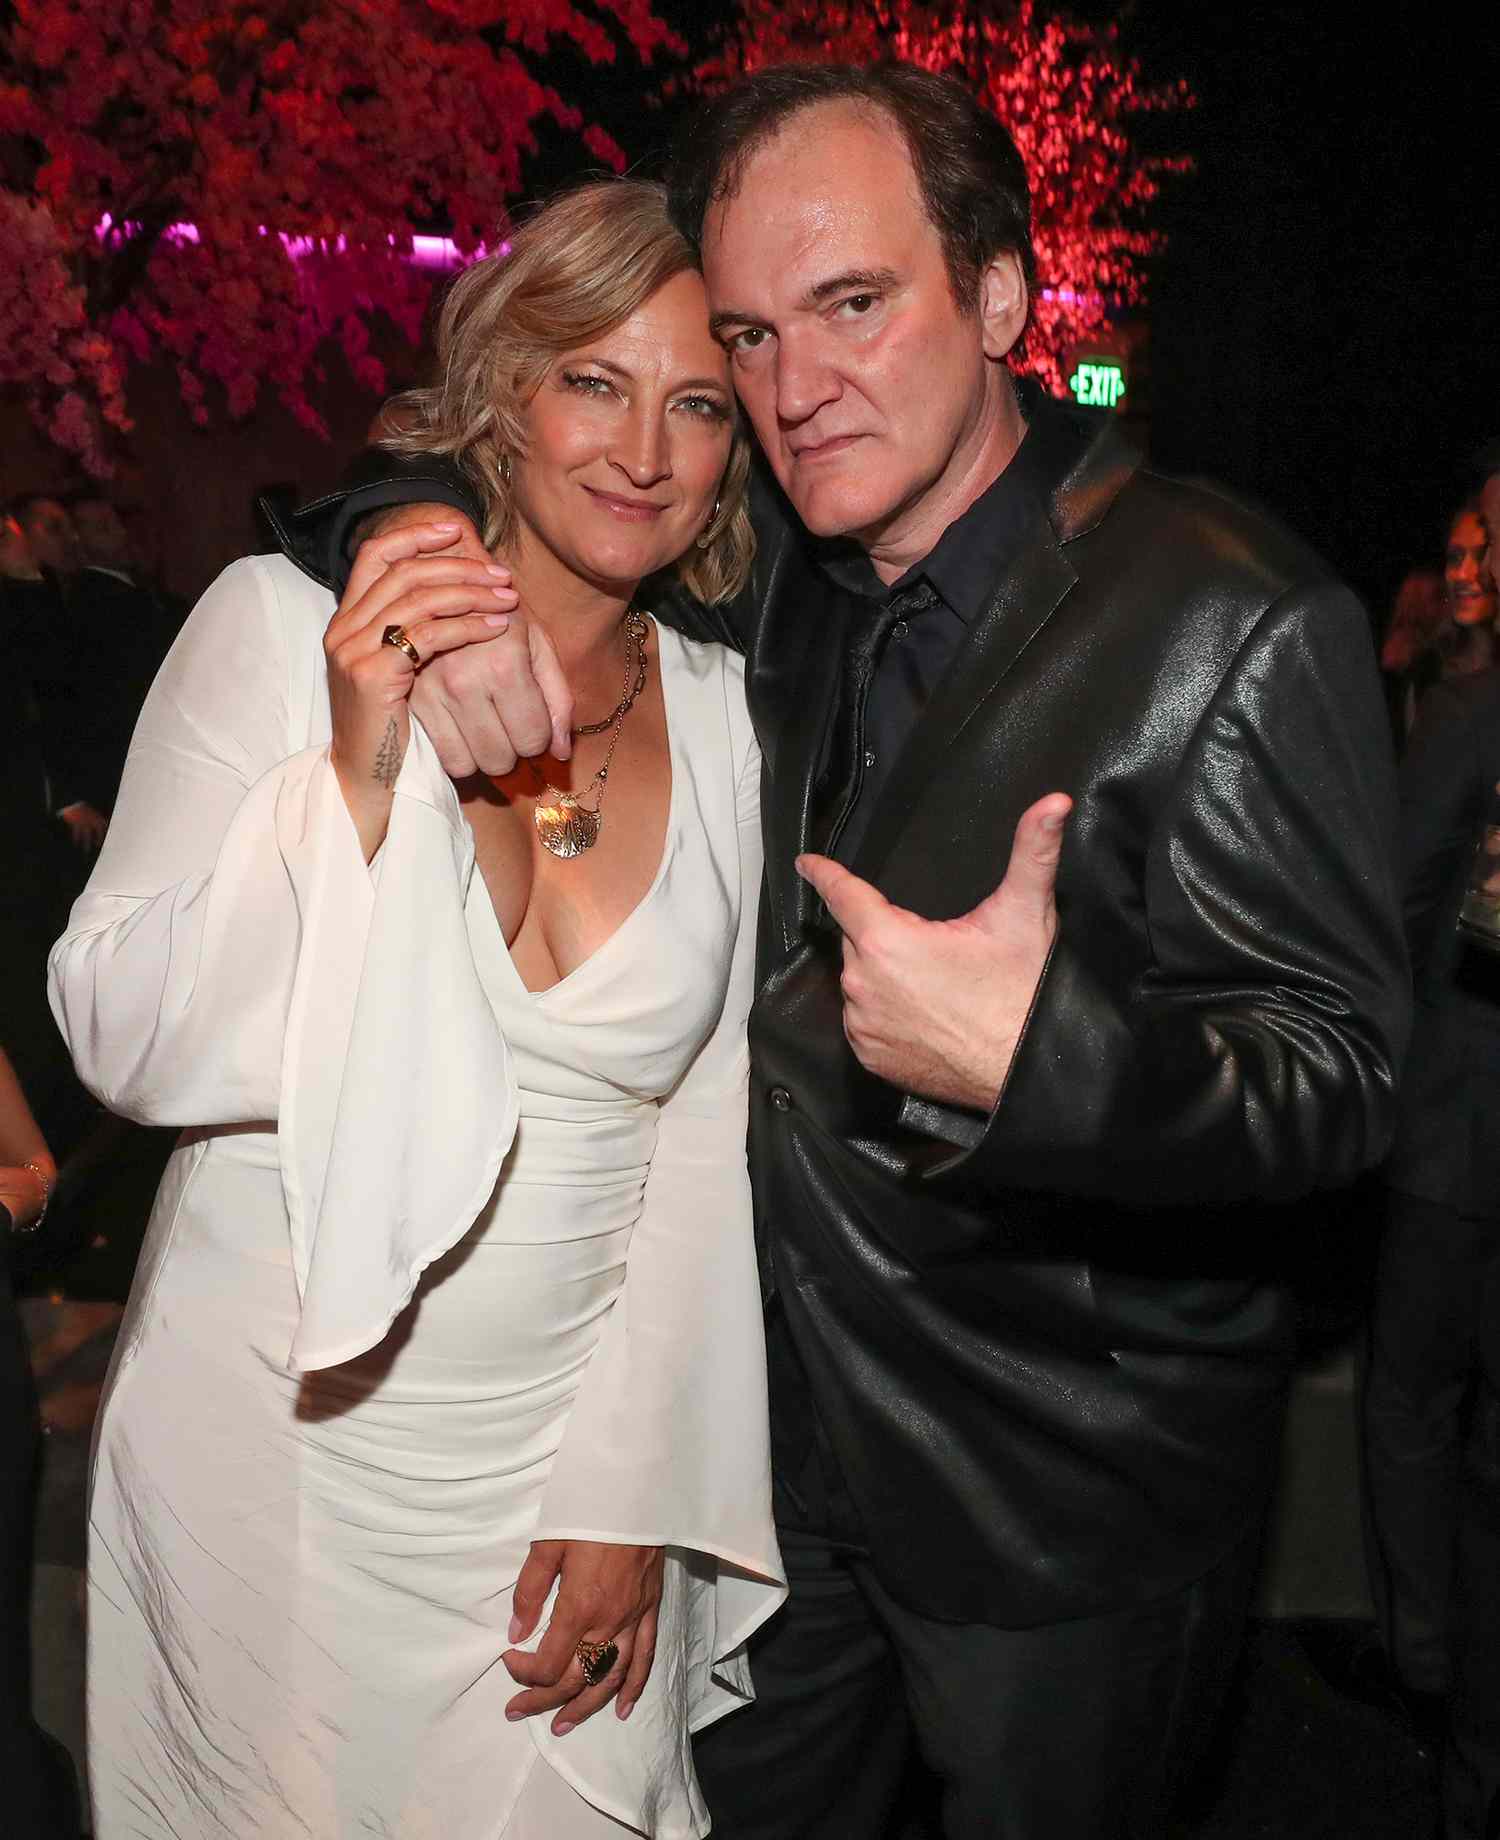 Zoe Bell and Quentin Tarantino